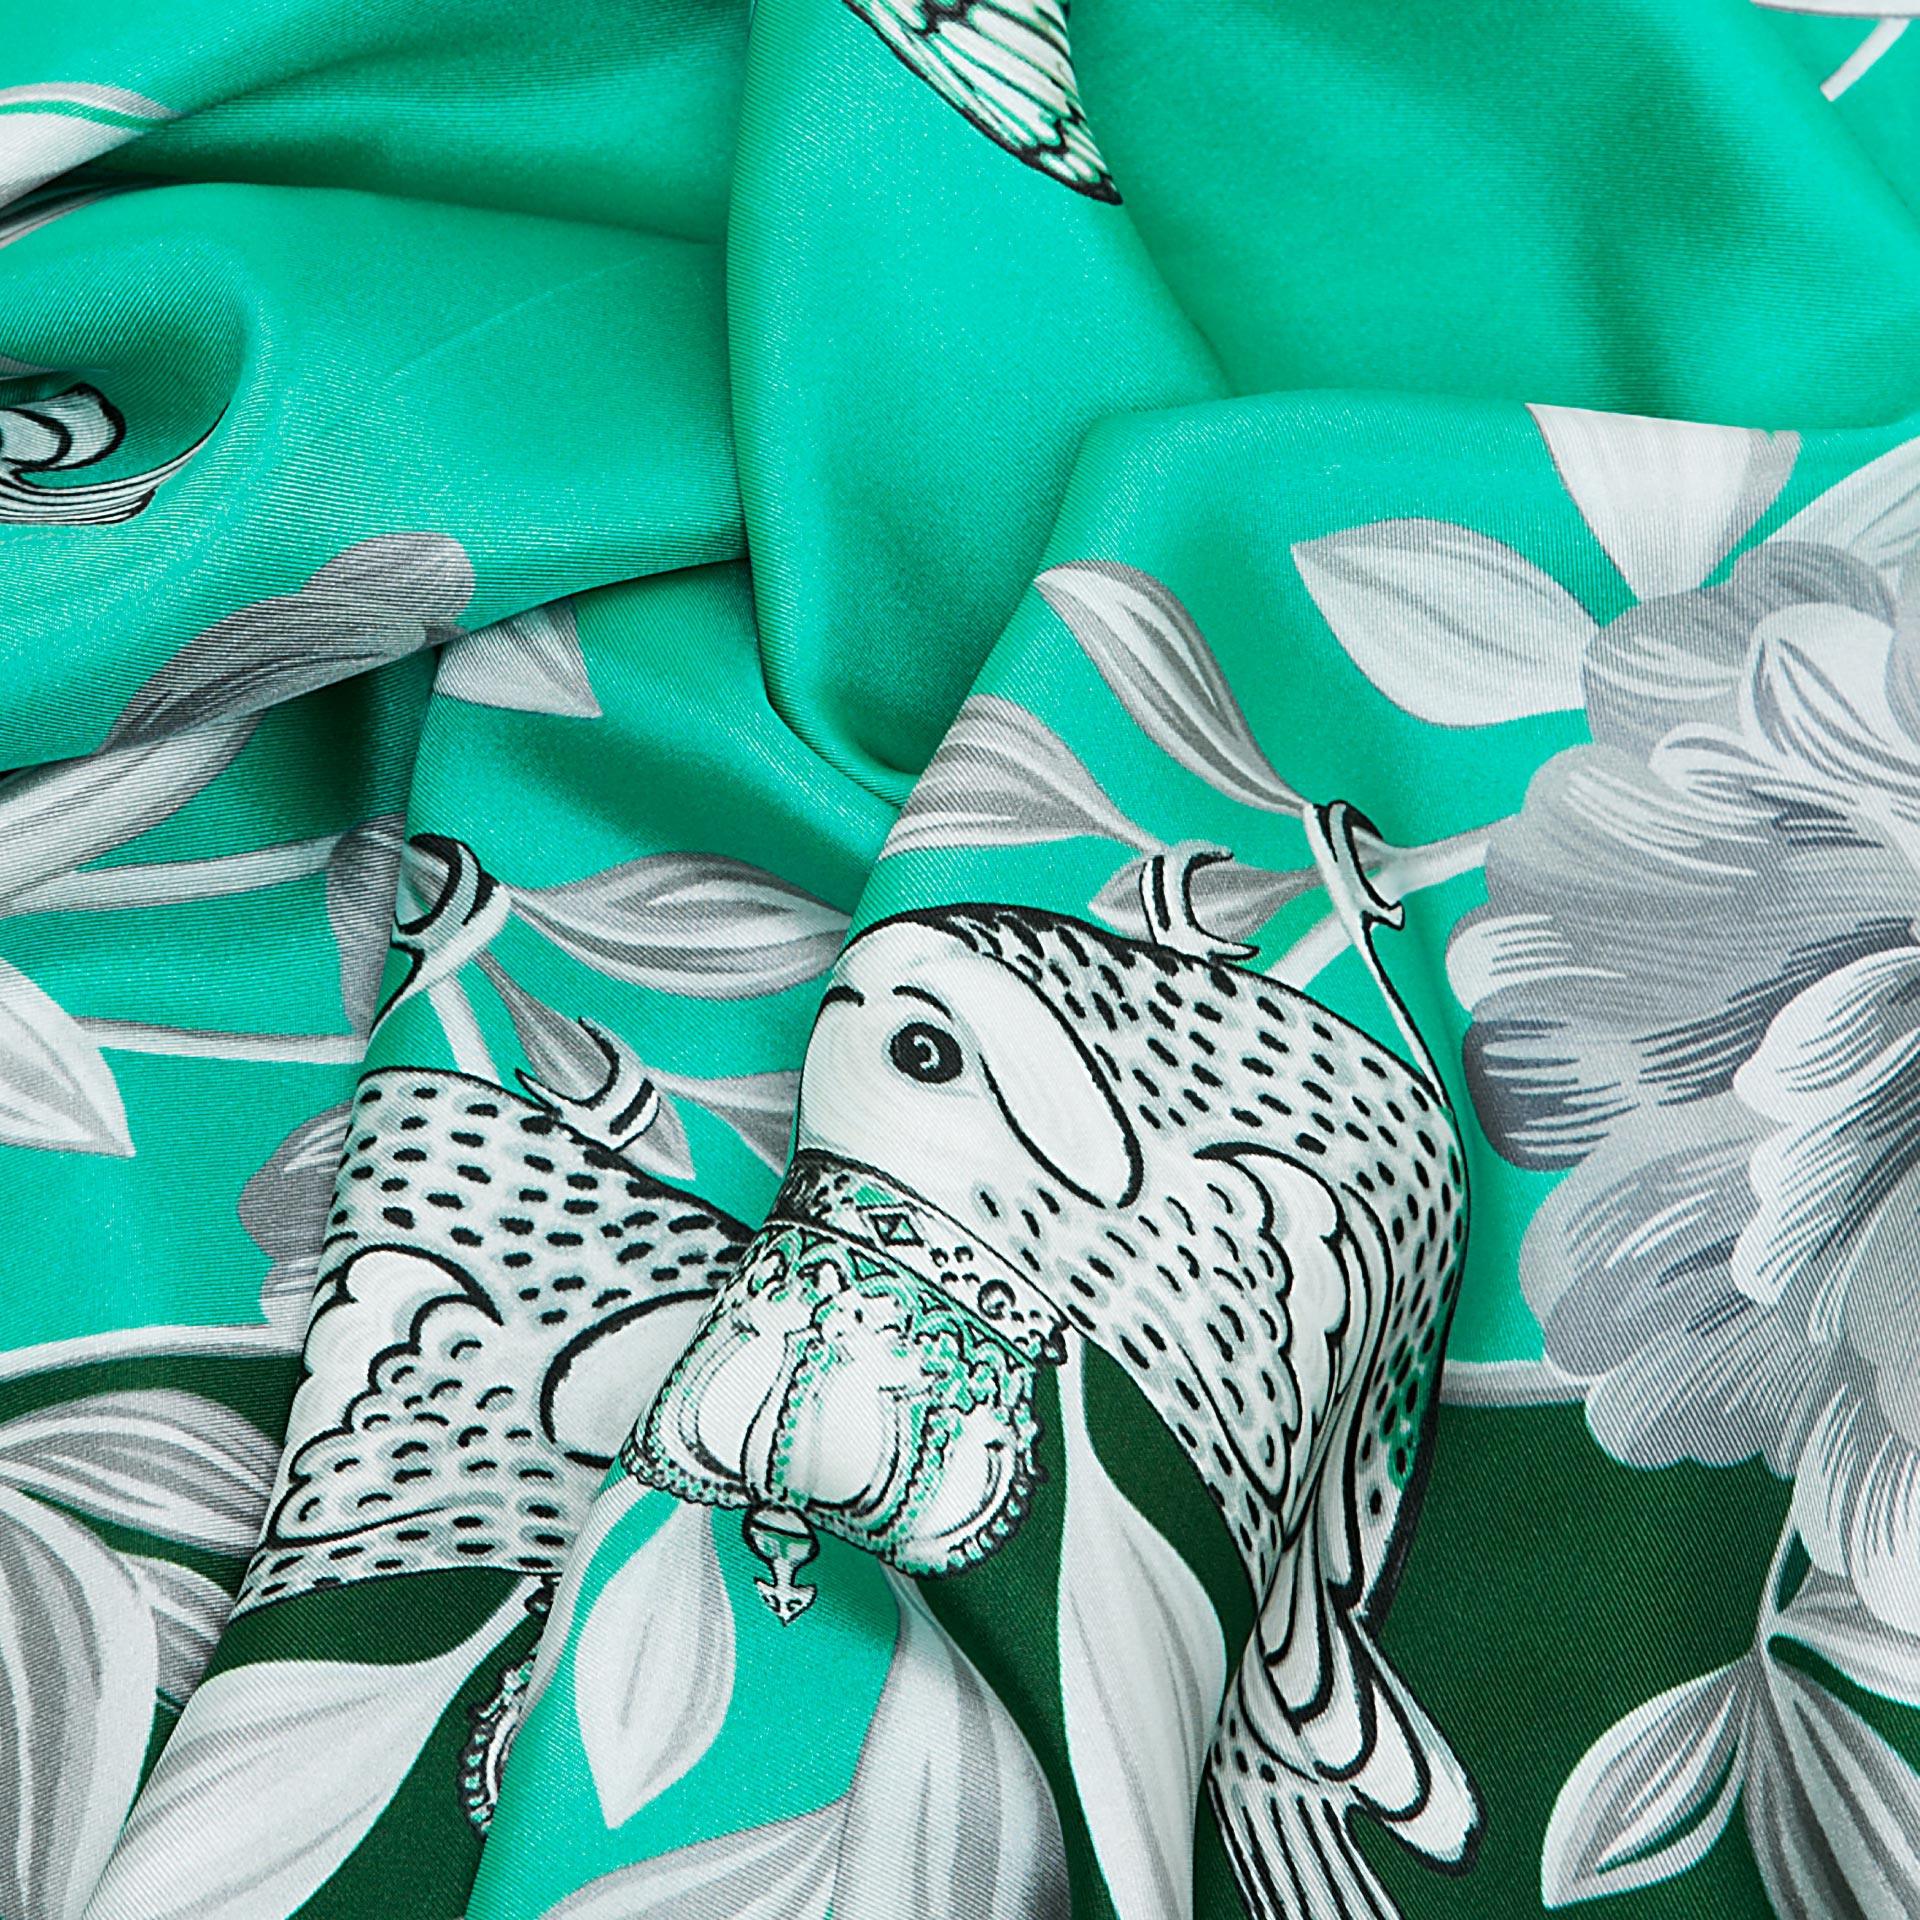 Emerald Green British Rose Garden Silk Scarf - The perfect blend of London's design and Italian craftsmanship, an exquisite gift choice.